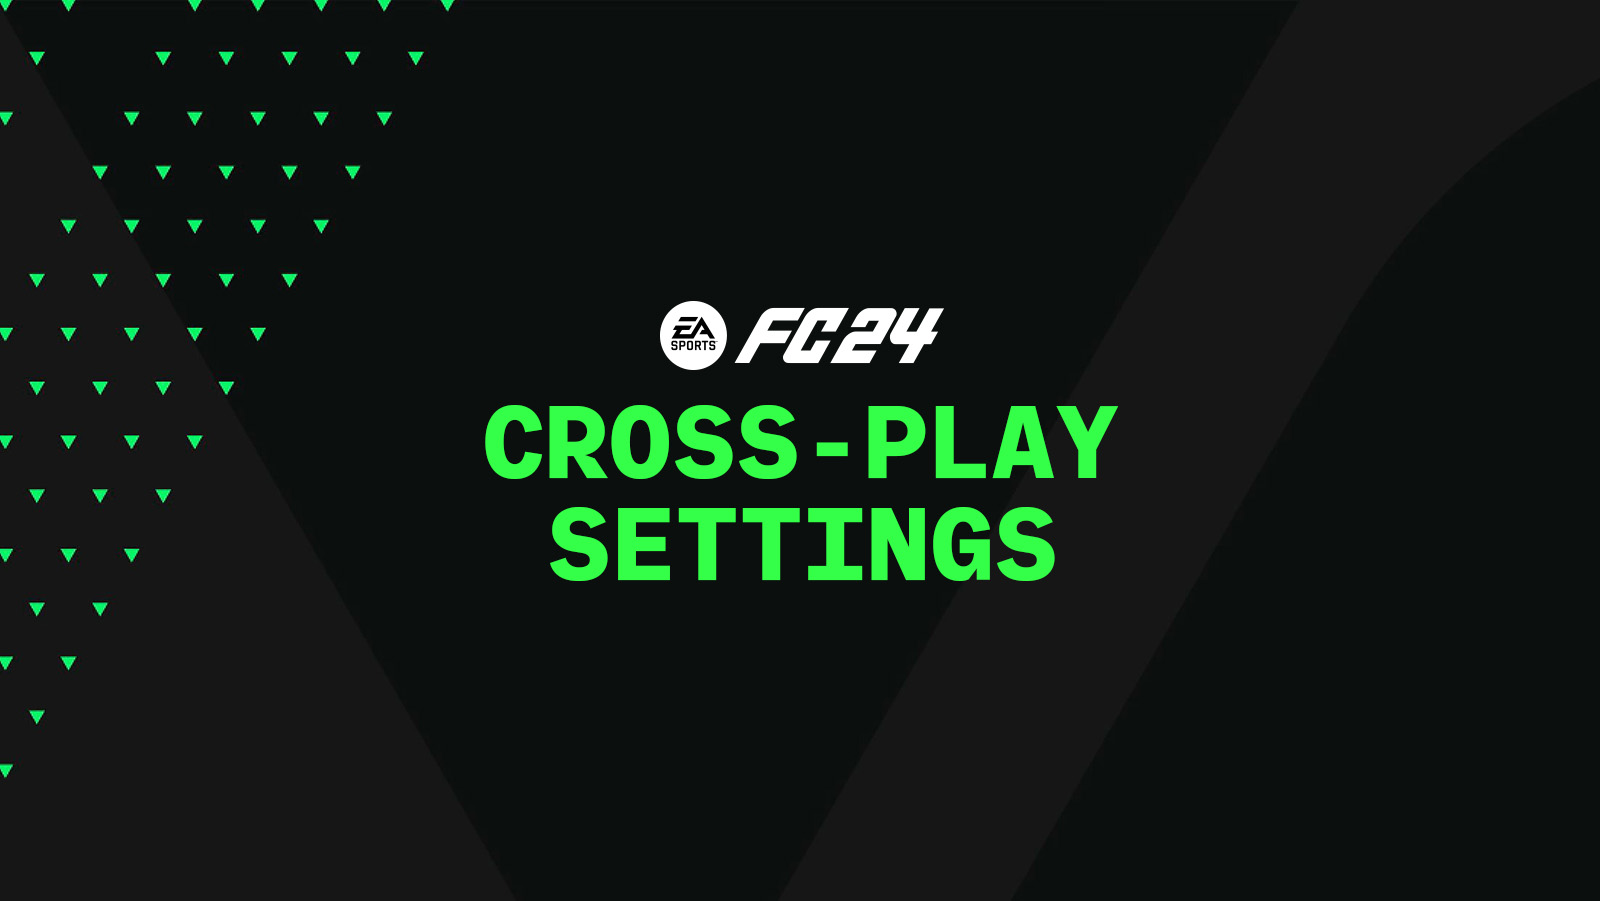 EA FC 24 cross-platform explained – transfer market, Clubs and crossplay  modes confirmed - Mirror Online